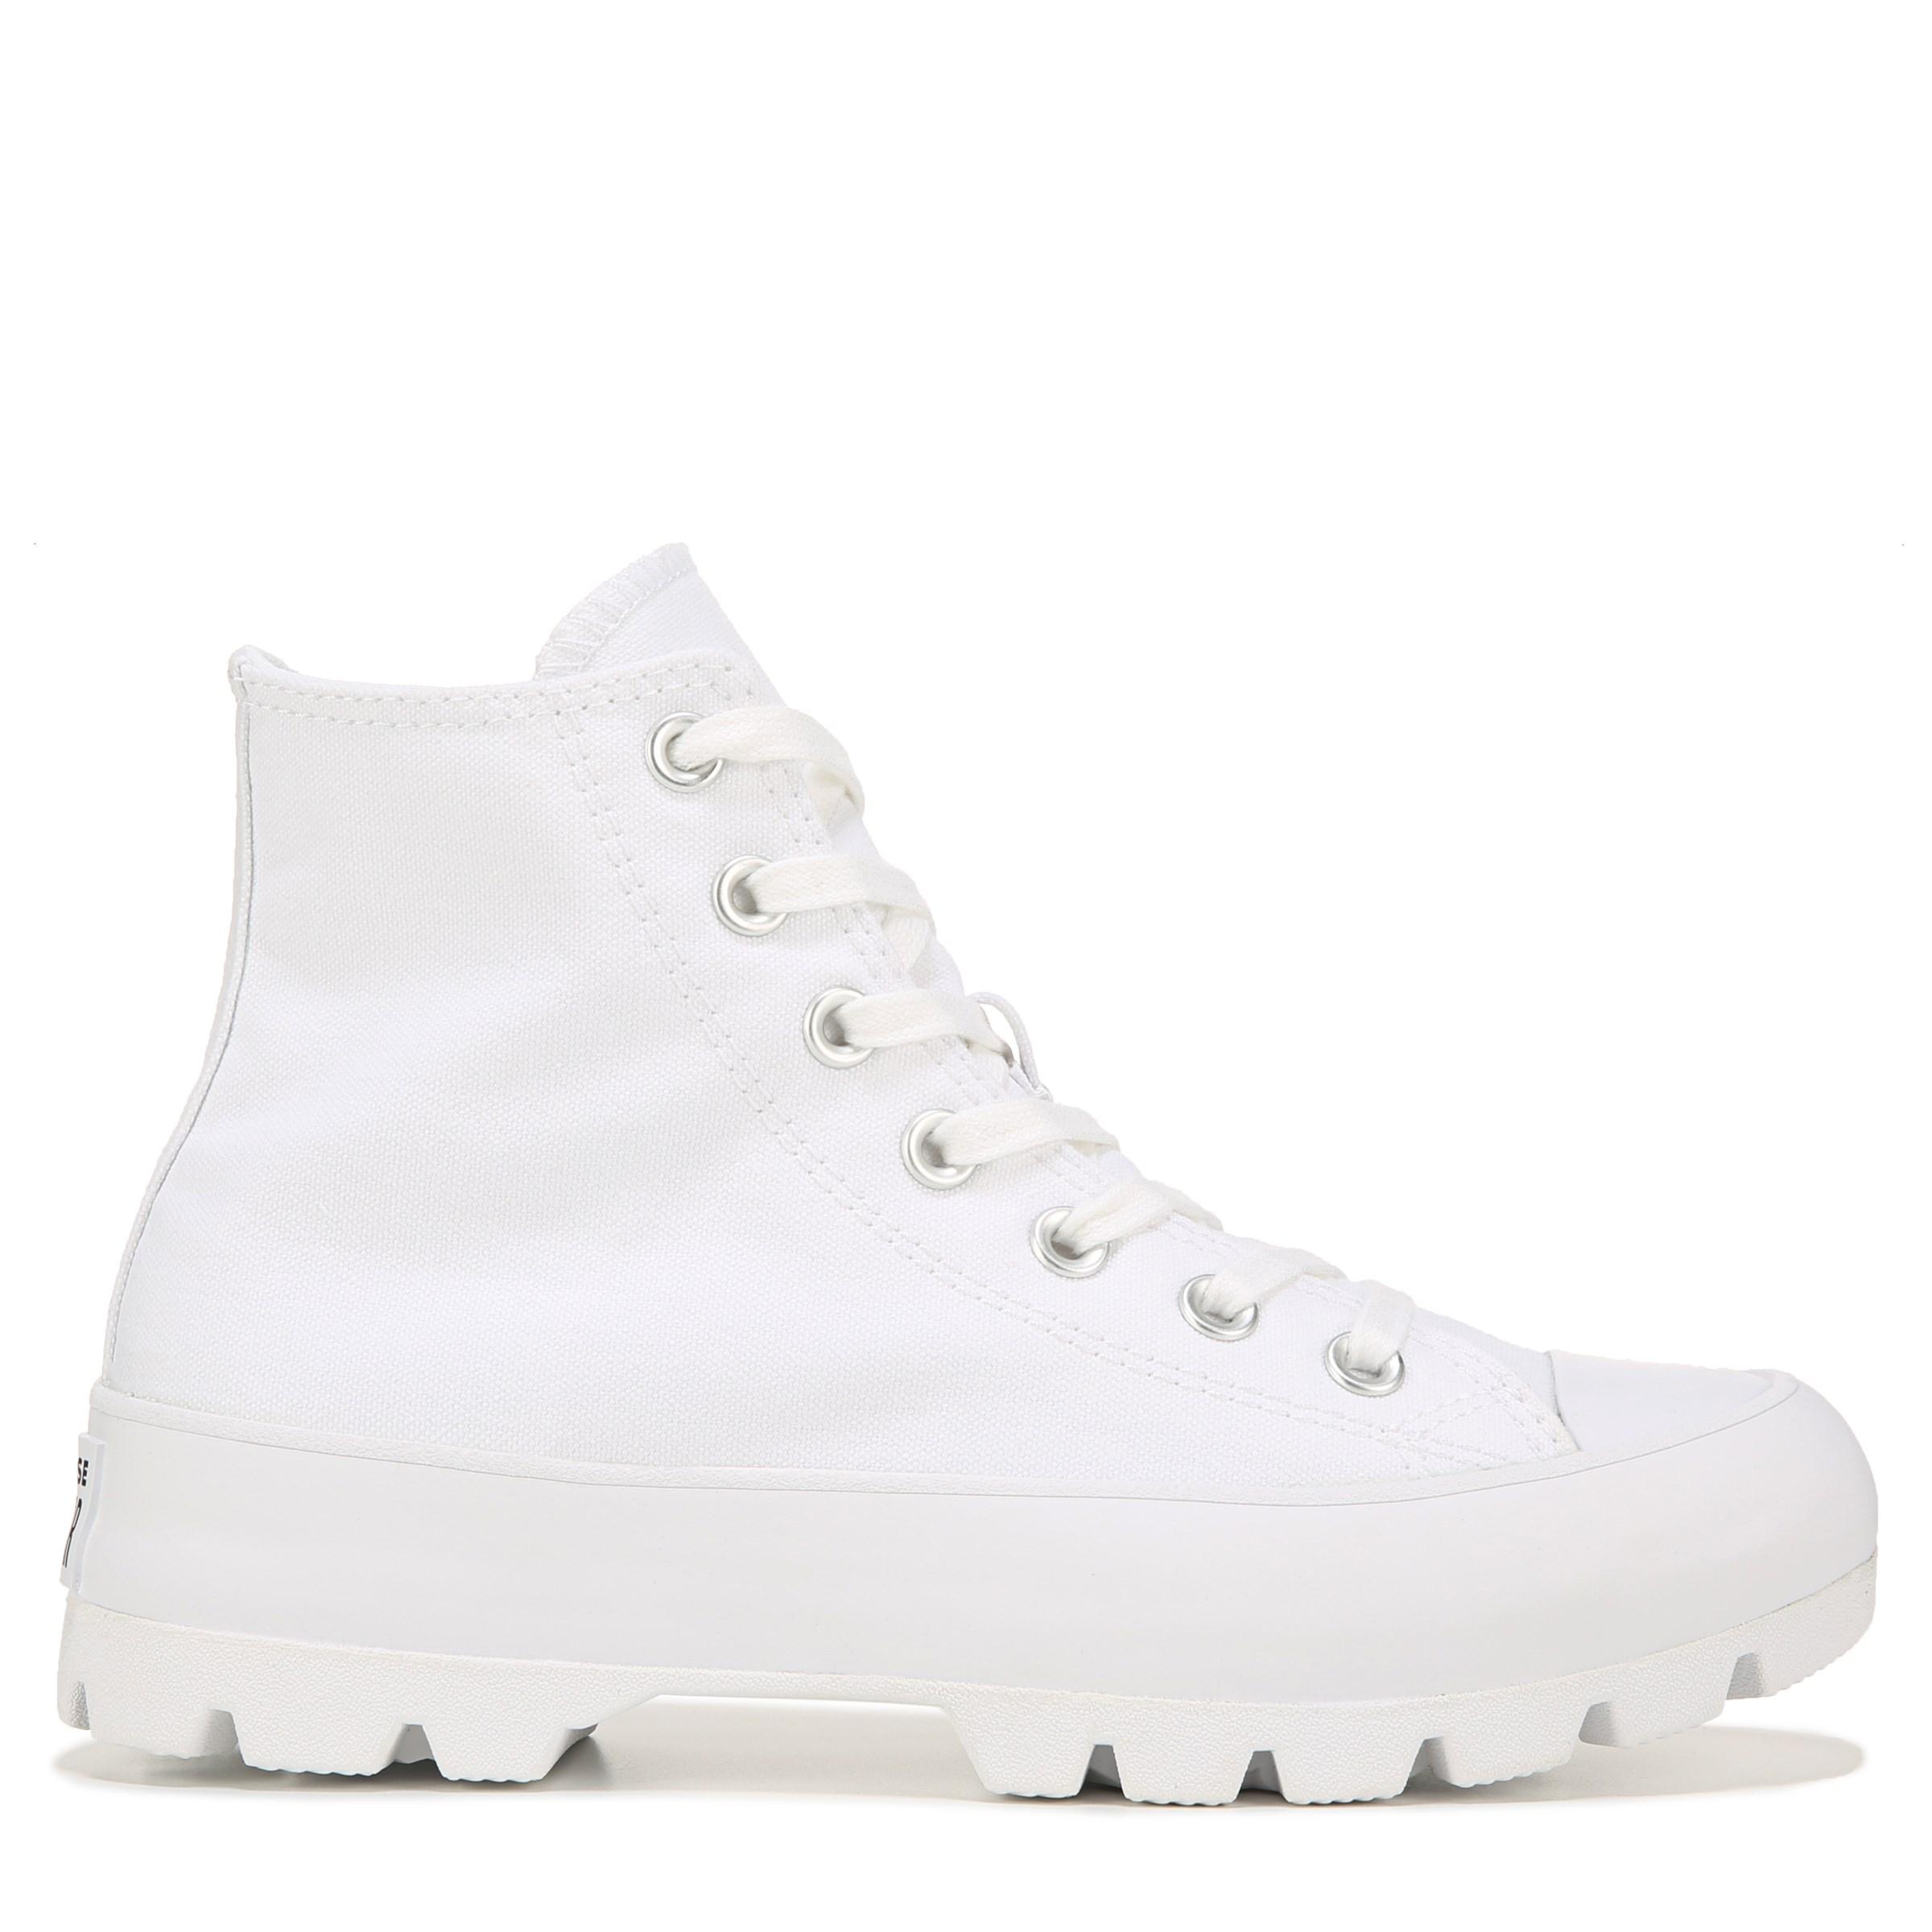 Converse Canvas Chuck Taylor All Star Lugged High Top Sneakers in White ...